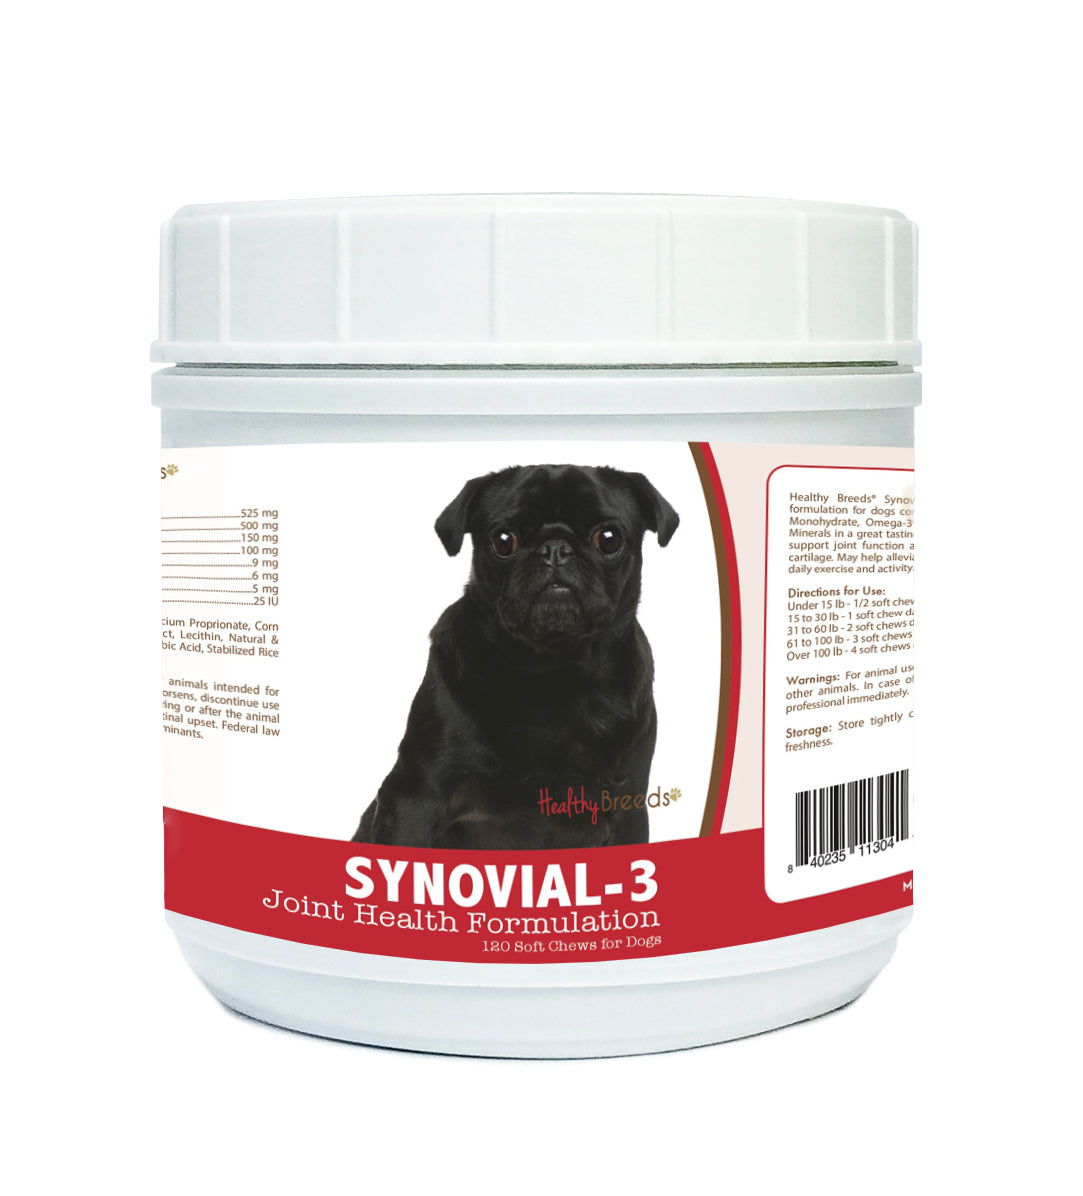 Pug Synovial-3 Joint Health Formulation Soft Chews 120 Count